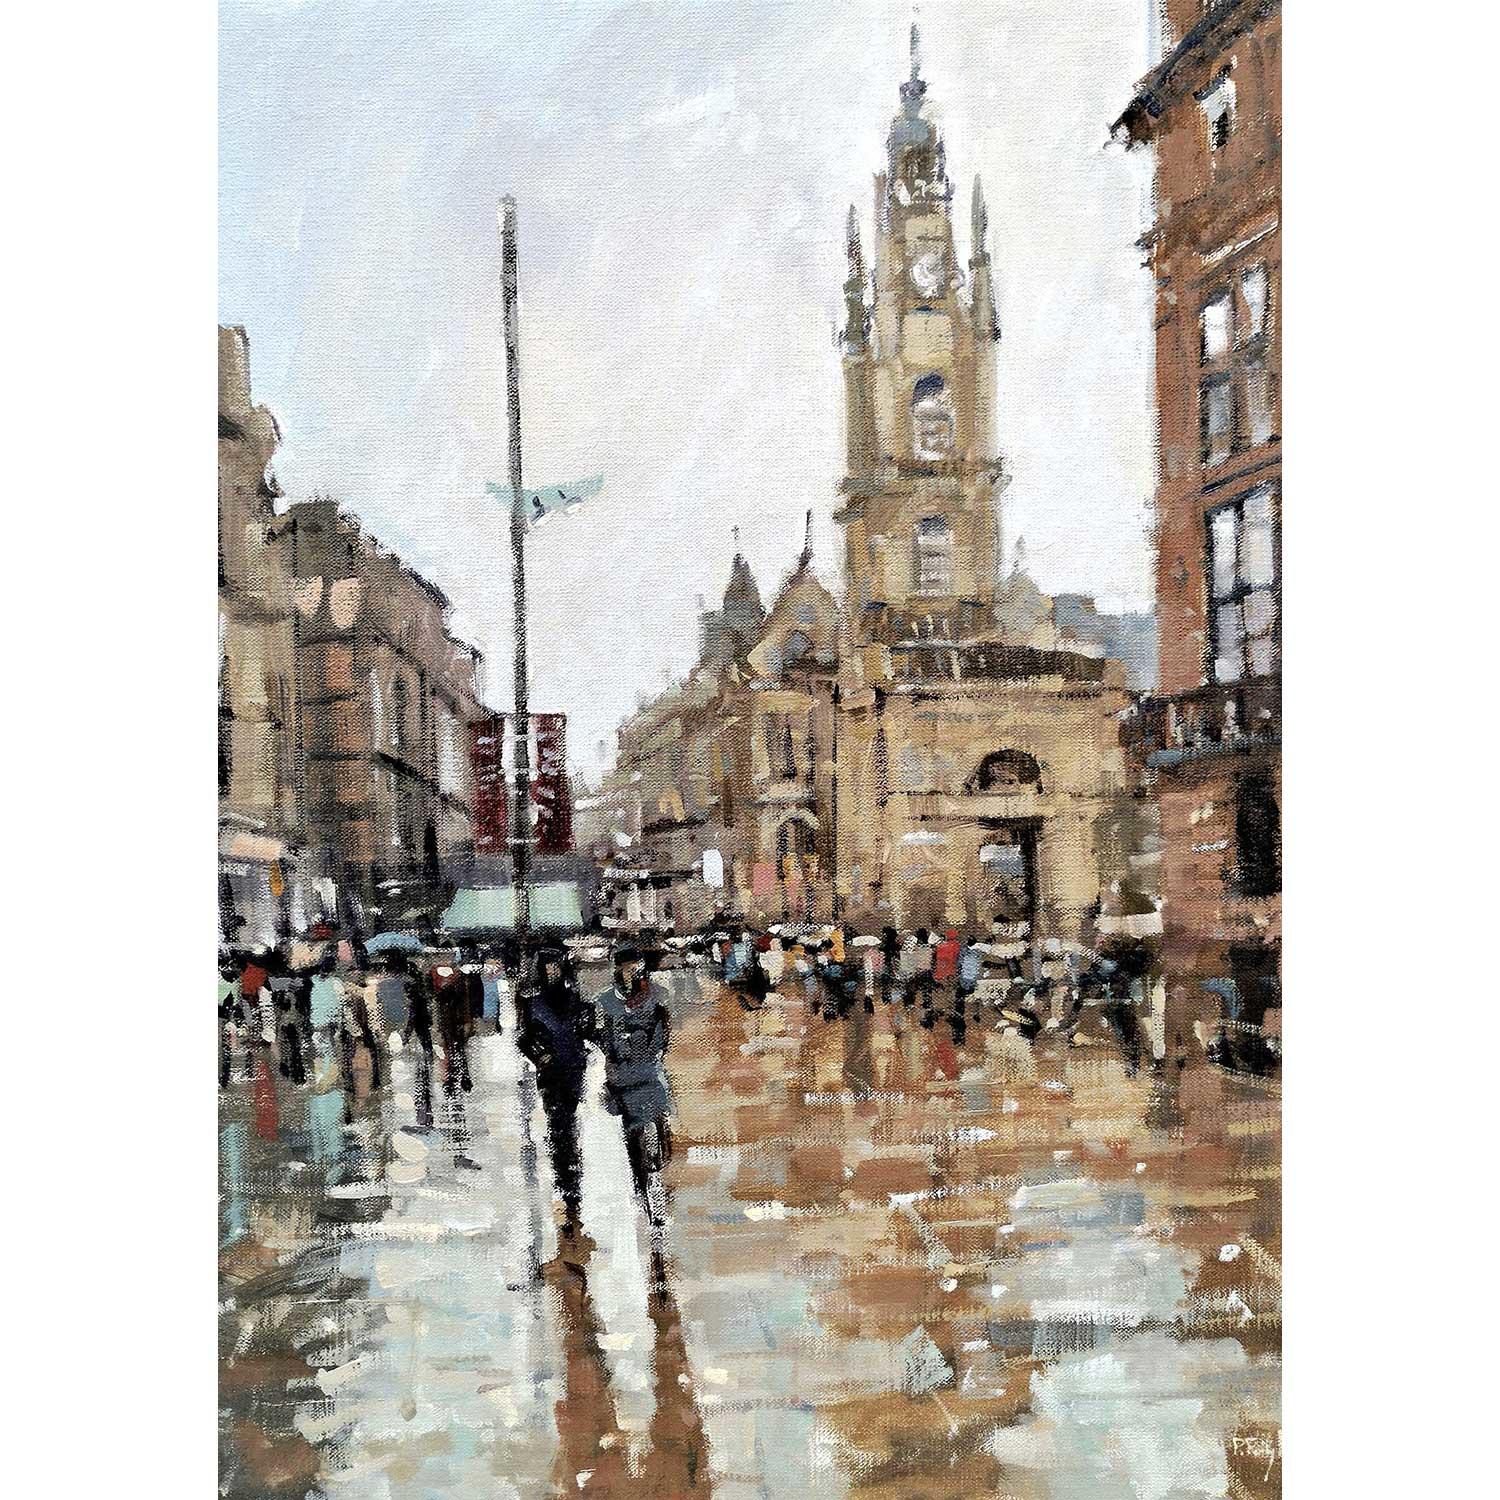 Wet Day, Glasgow by Peter Foyle